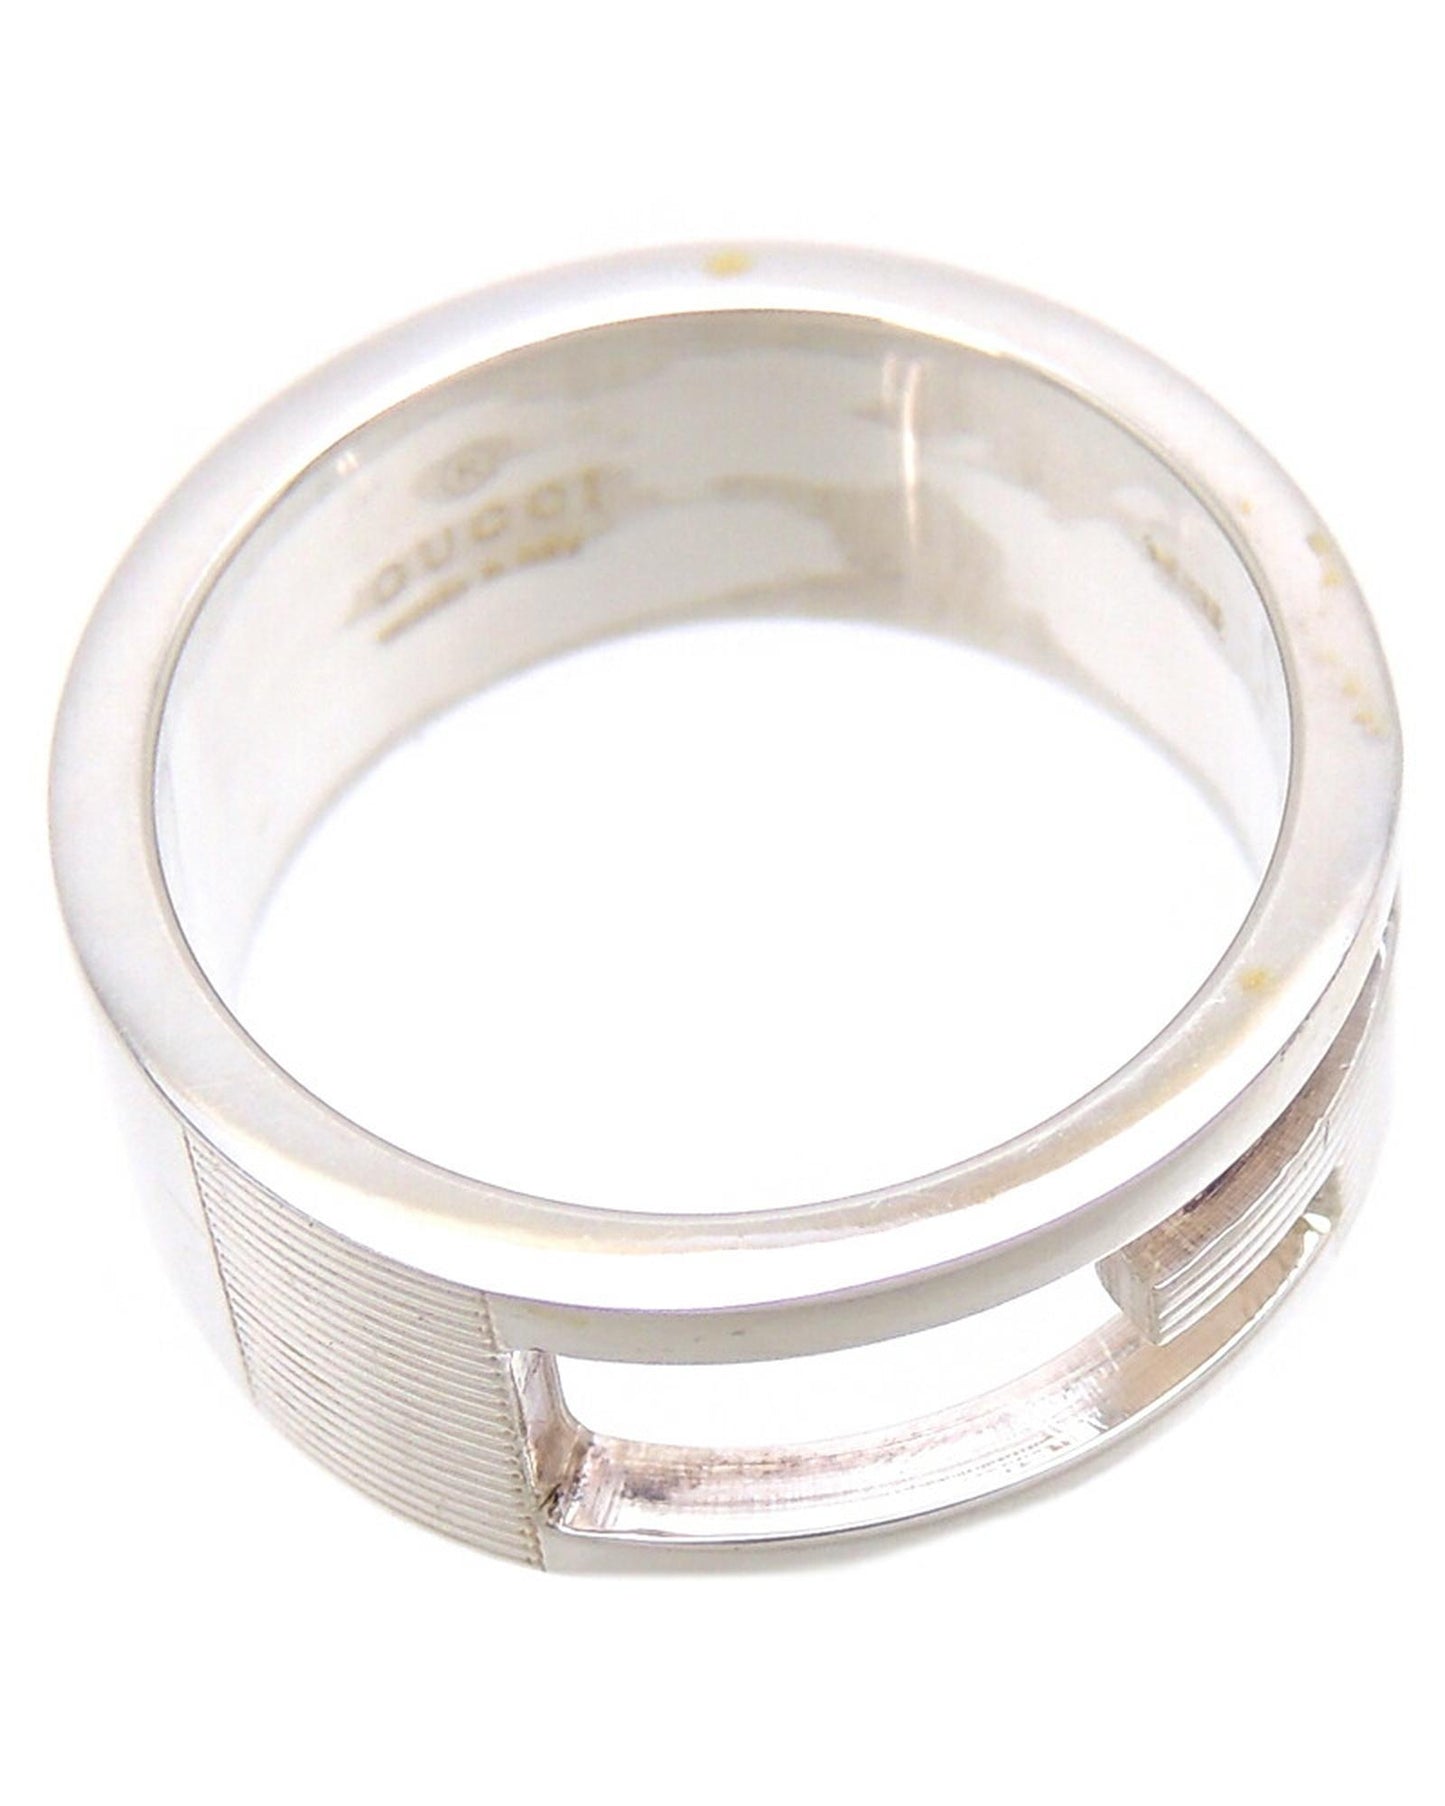 Gucci Men's Silver G Ring Jewelry - 53.1 Measurement in Silver